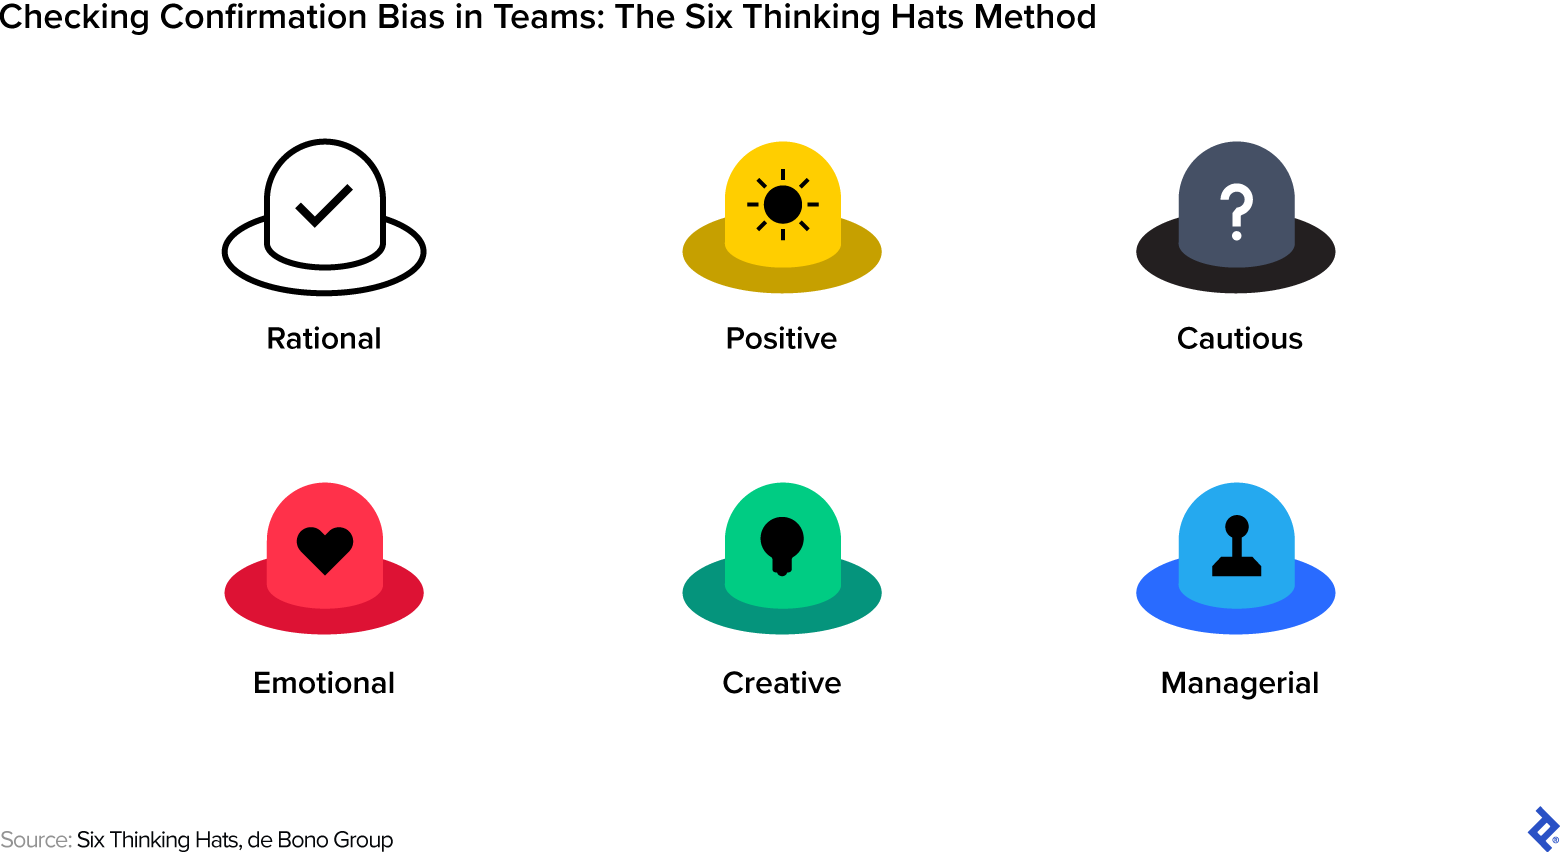 Hats represent different roles: white is rational, yellow is positive, black is cautious, red is emotional, green is creative, and blue is managerial.